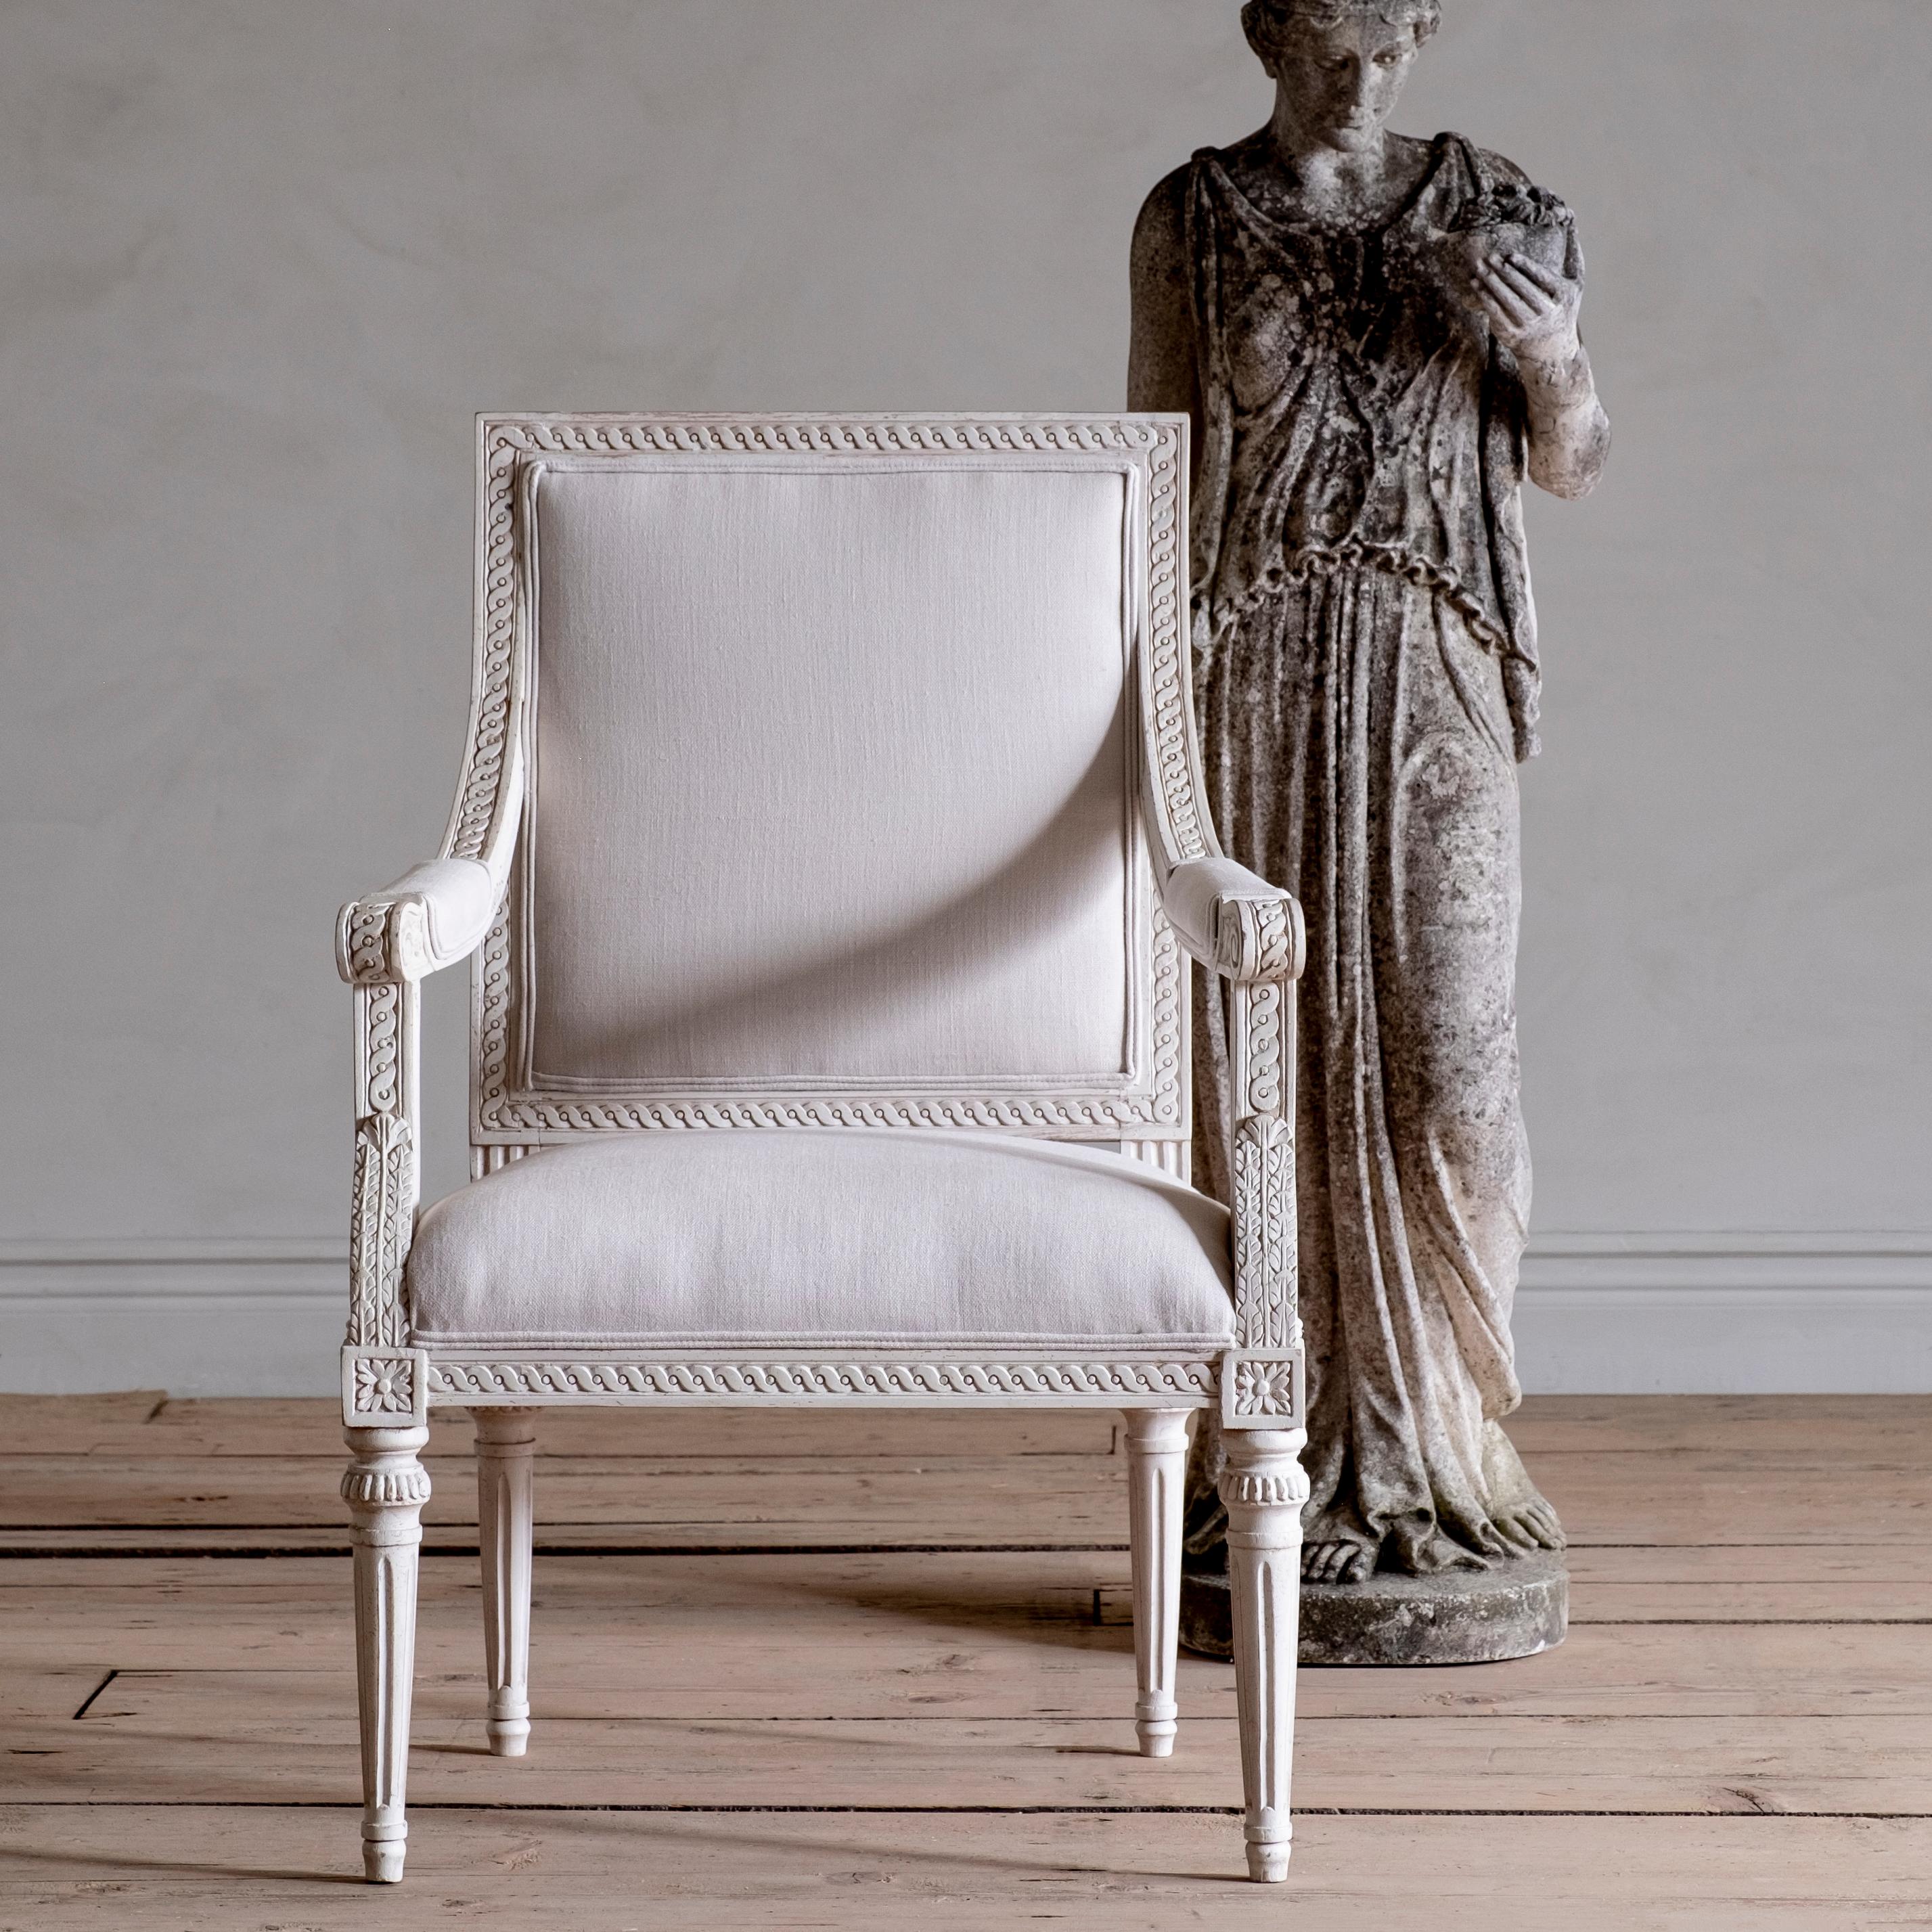 This fine Gustavian style armchair is inspired by a remarkable Gustavian period square back armchair from our own collection. With fine carvings thru out the entire chair. Originally designed and made by Stockholm chair master Melchior Lundberg